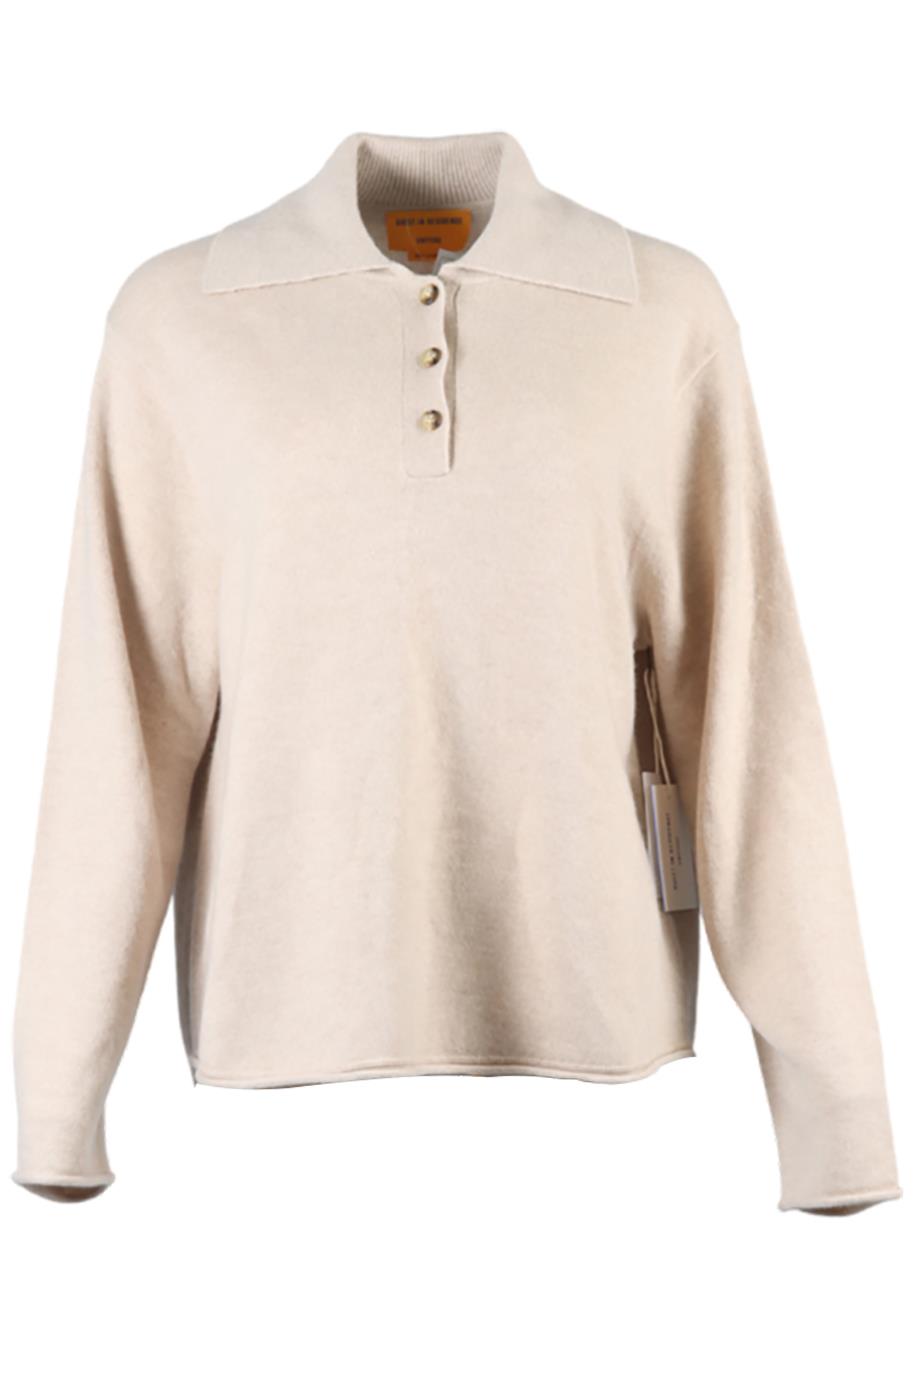 GUEST IN RESIDENCE CASHMERE SWEATER SMALL